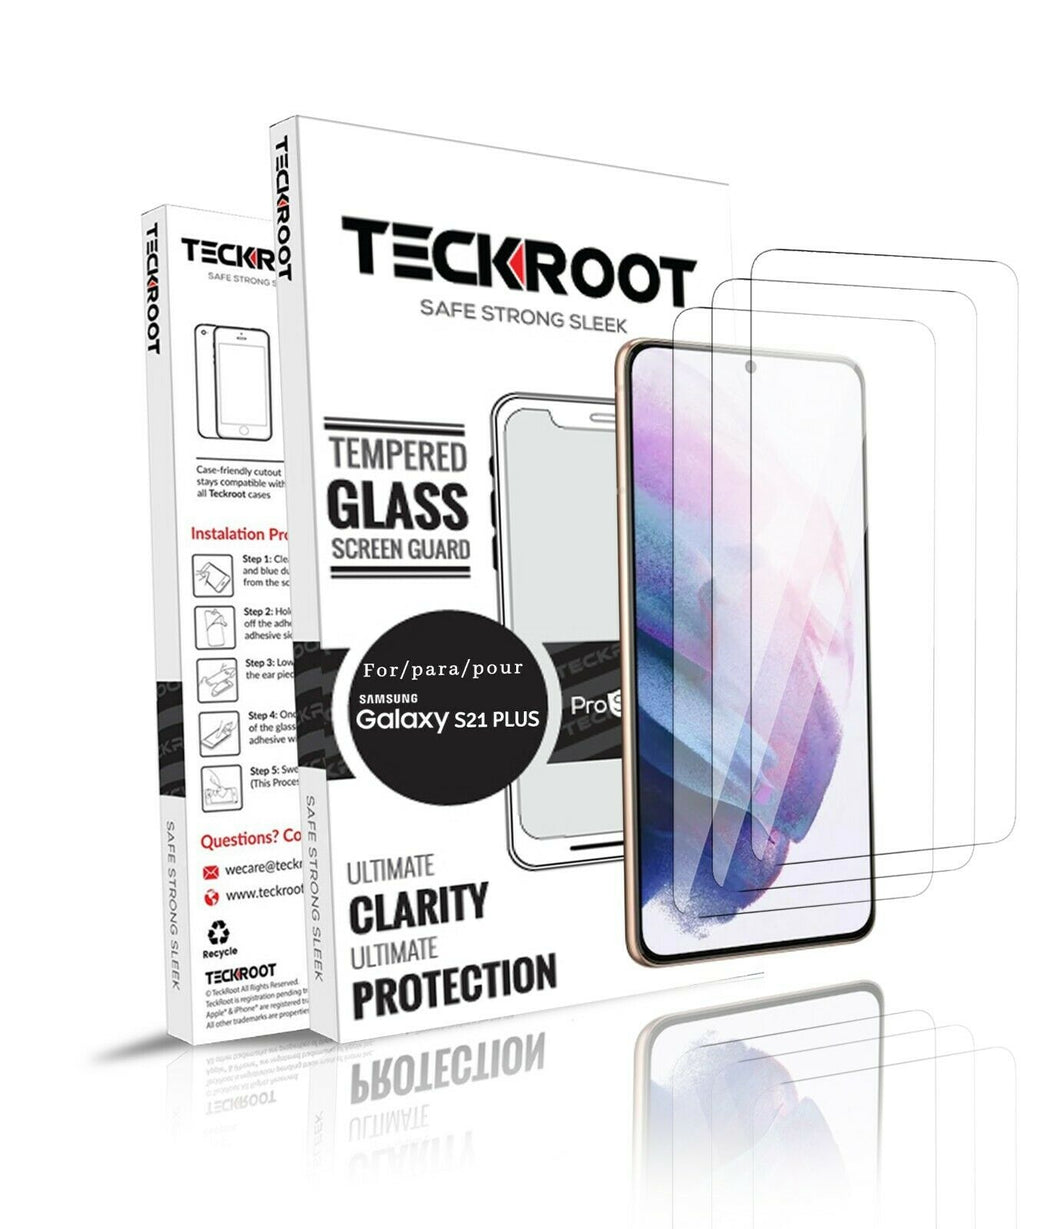 Samsung Galaxy S21 Plus Tempered Glass Screen Protector ProShield Edition [3 pack]